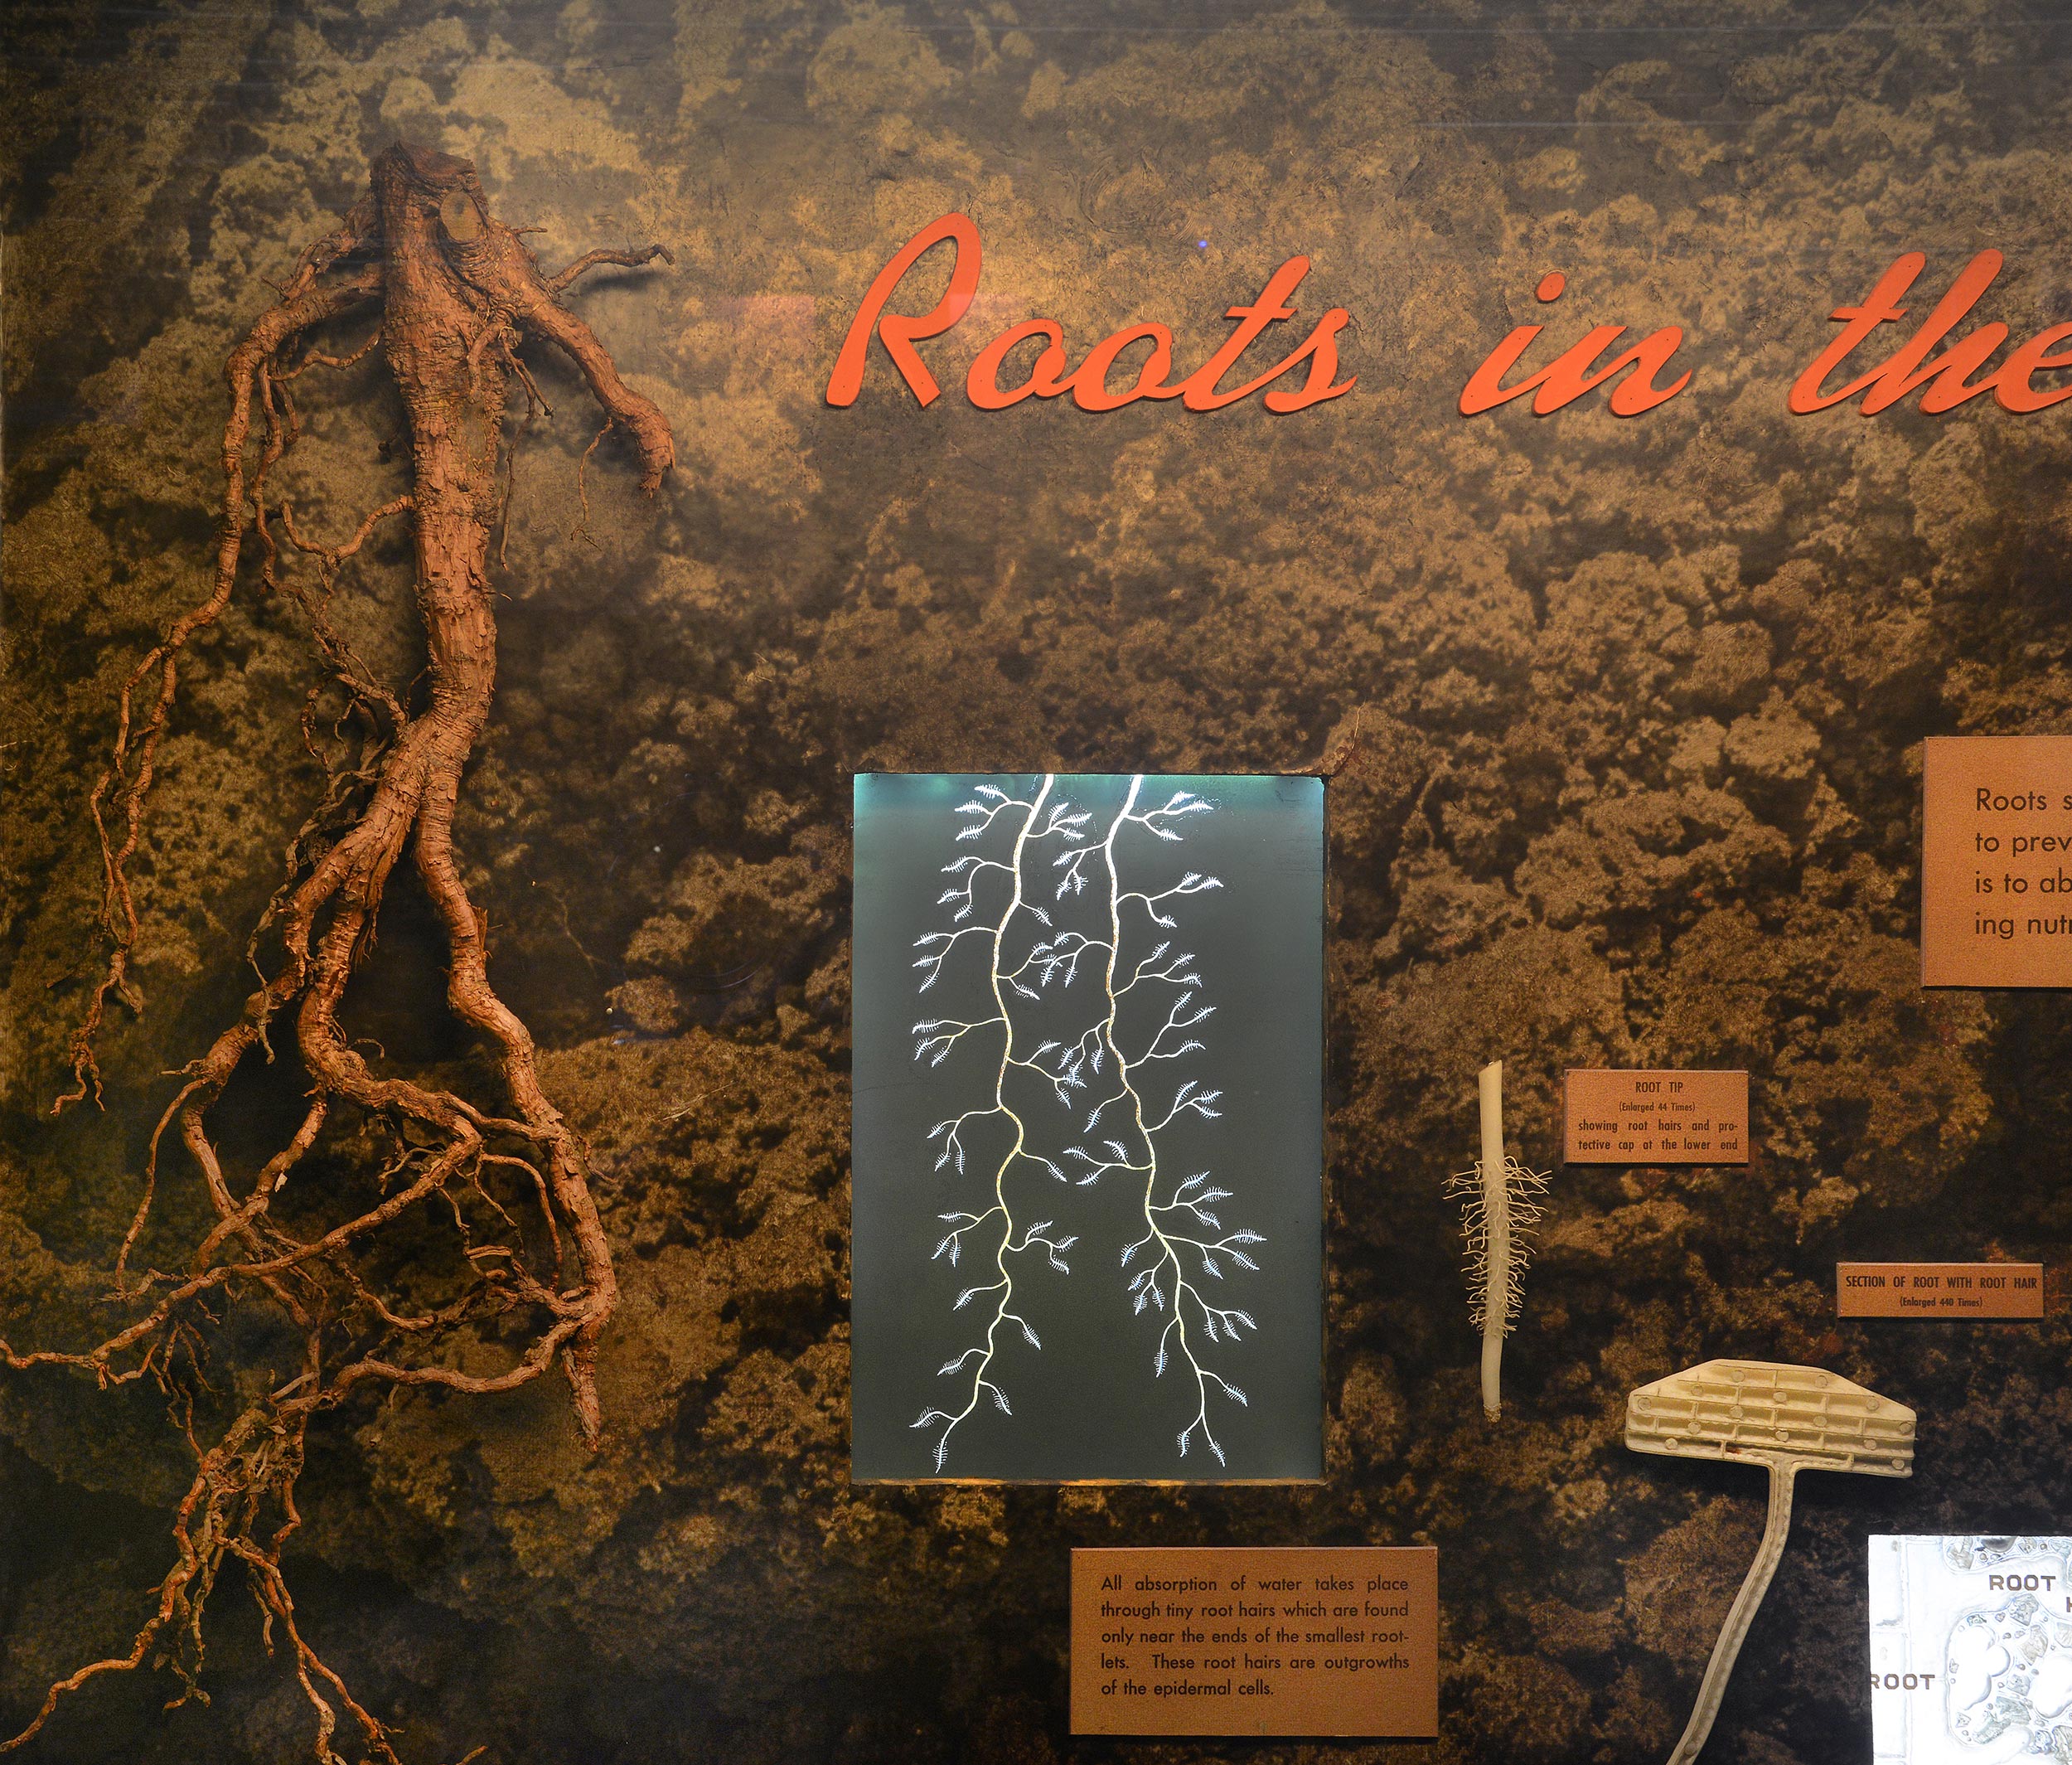 Section of an exhibit case showing models and dioramas of roots.